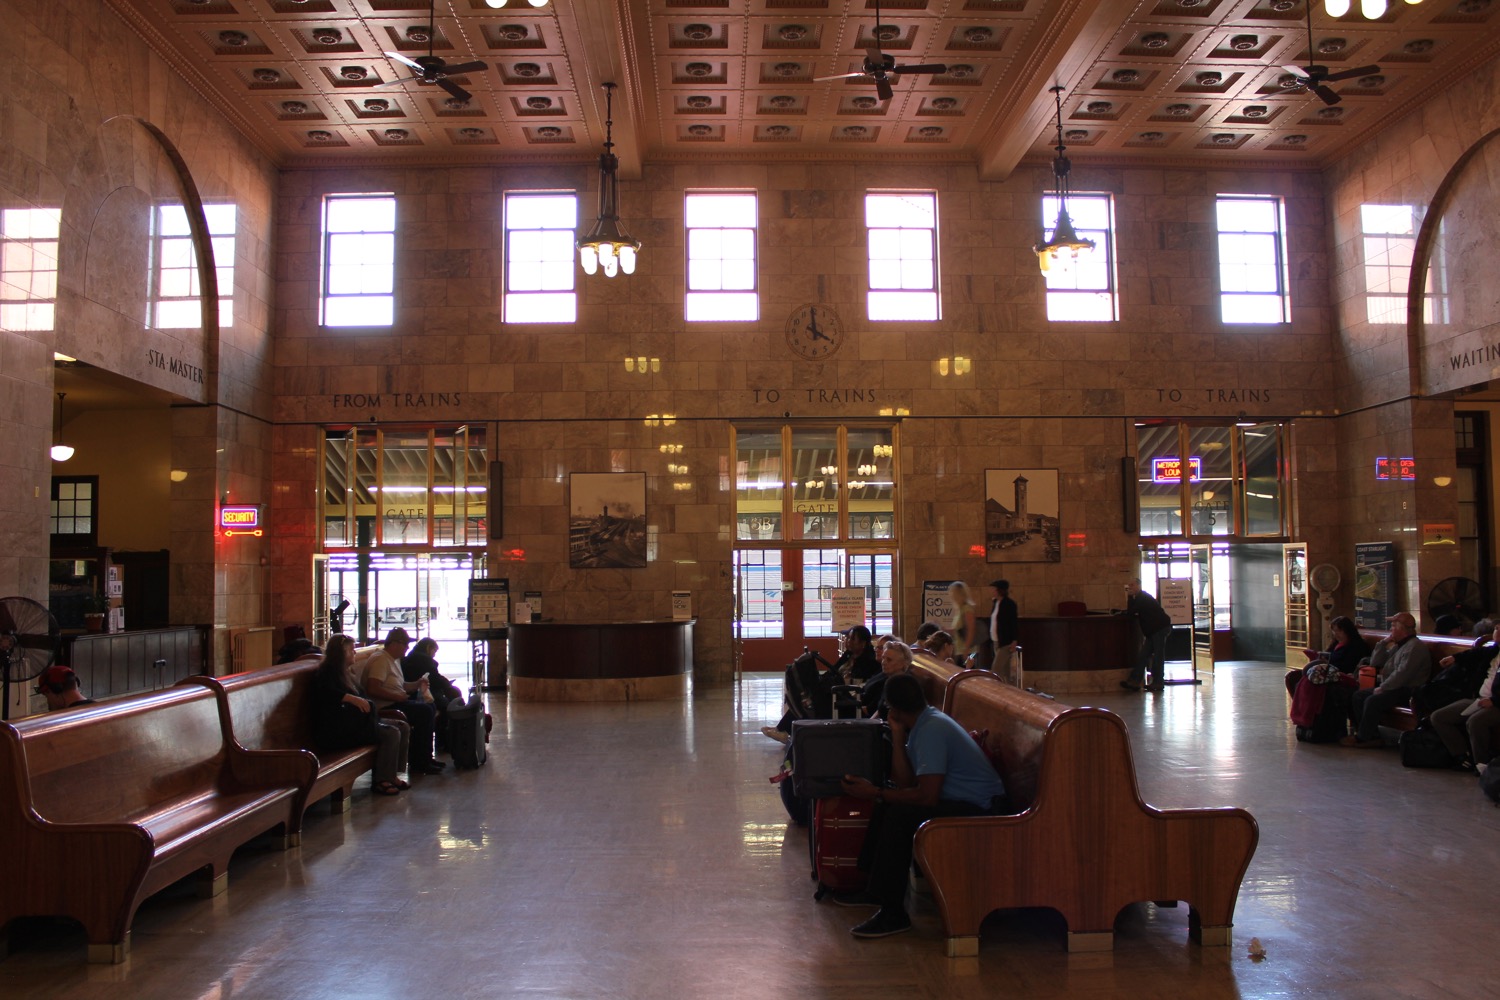 people sitting on benches in a train station